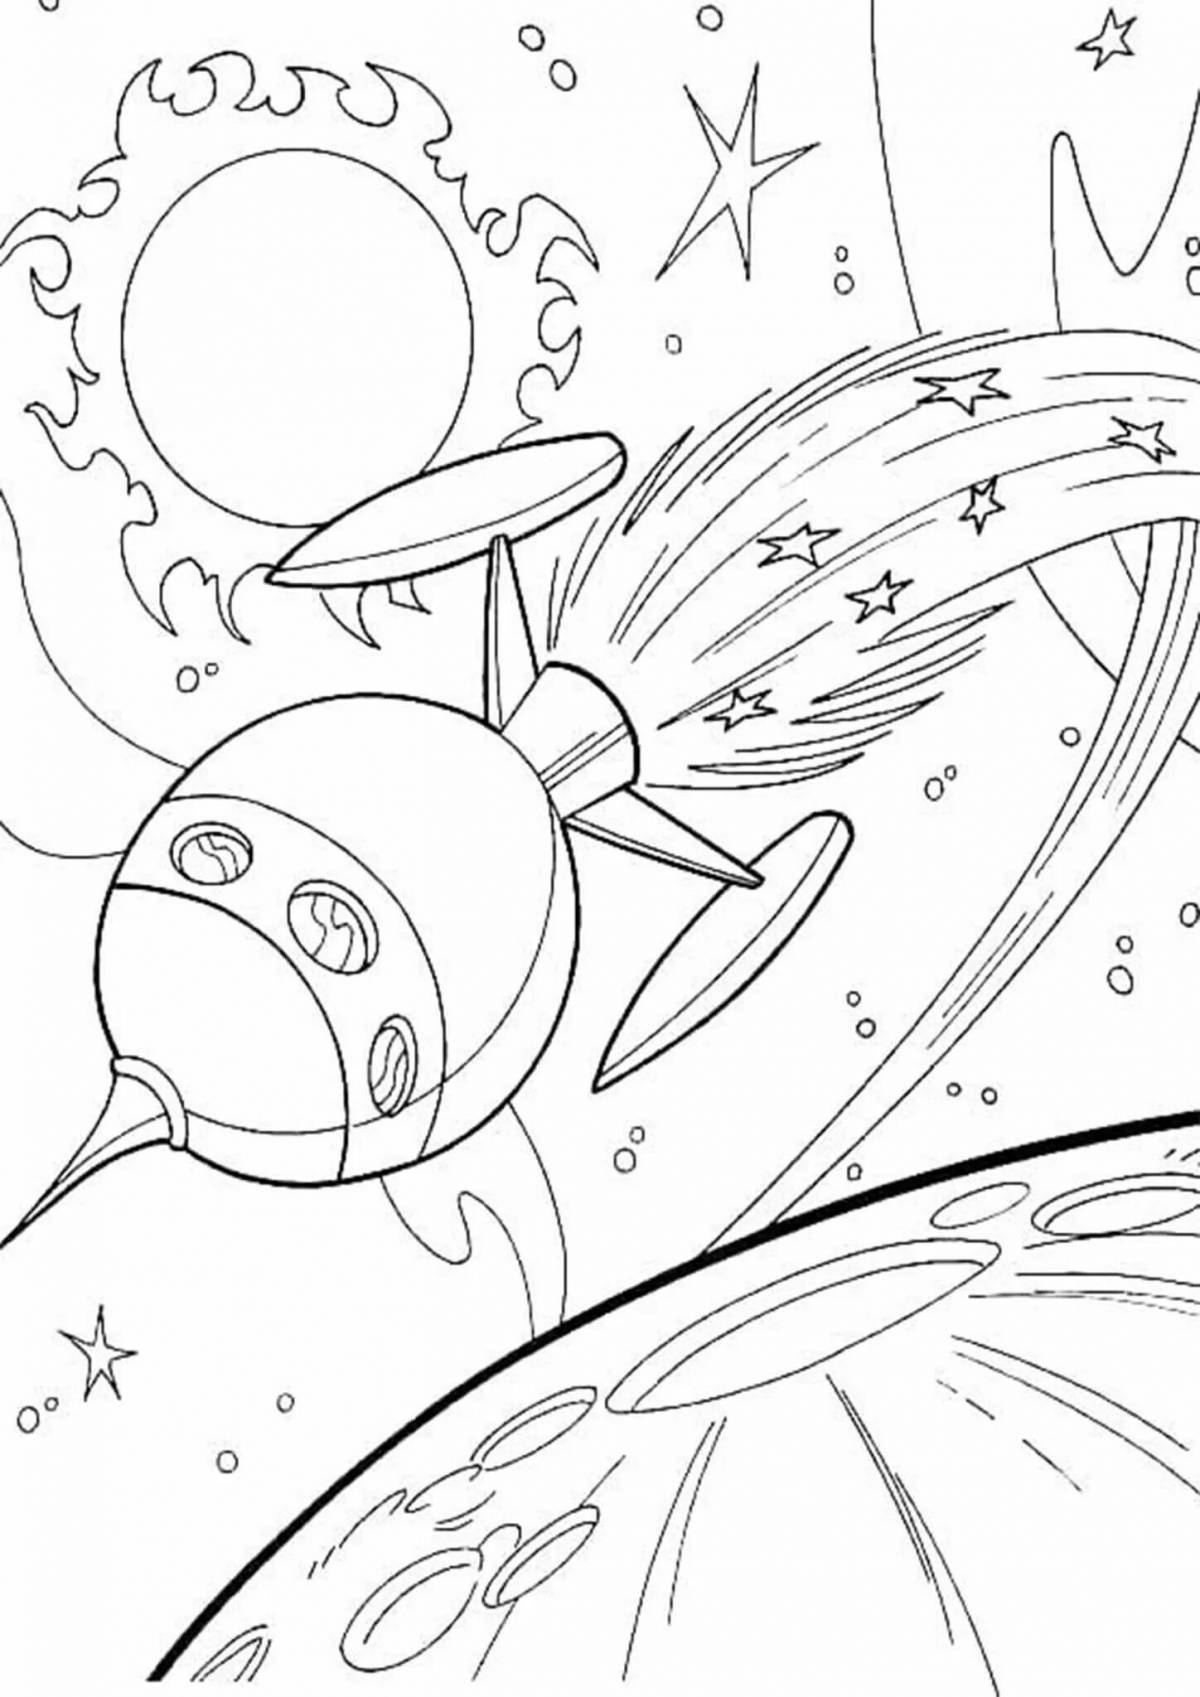 Sky space coloring book